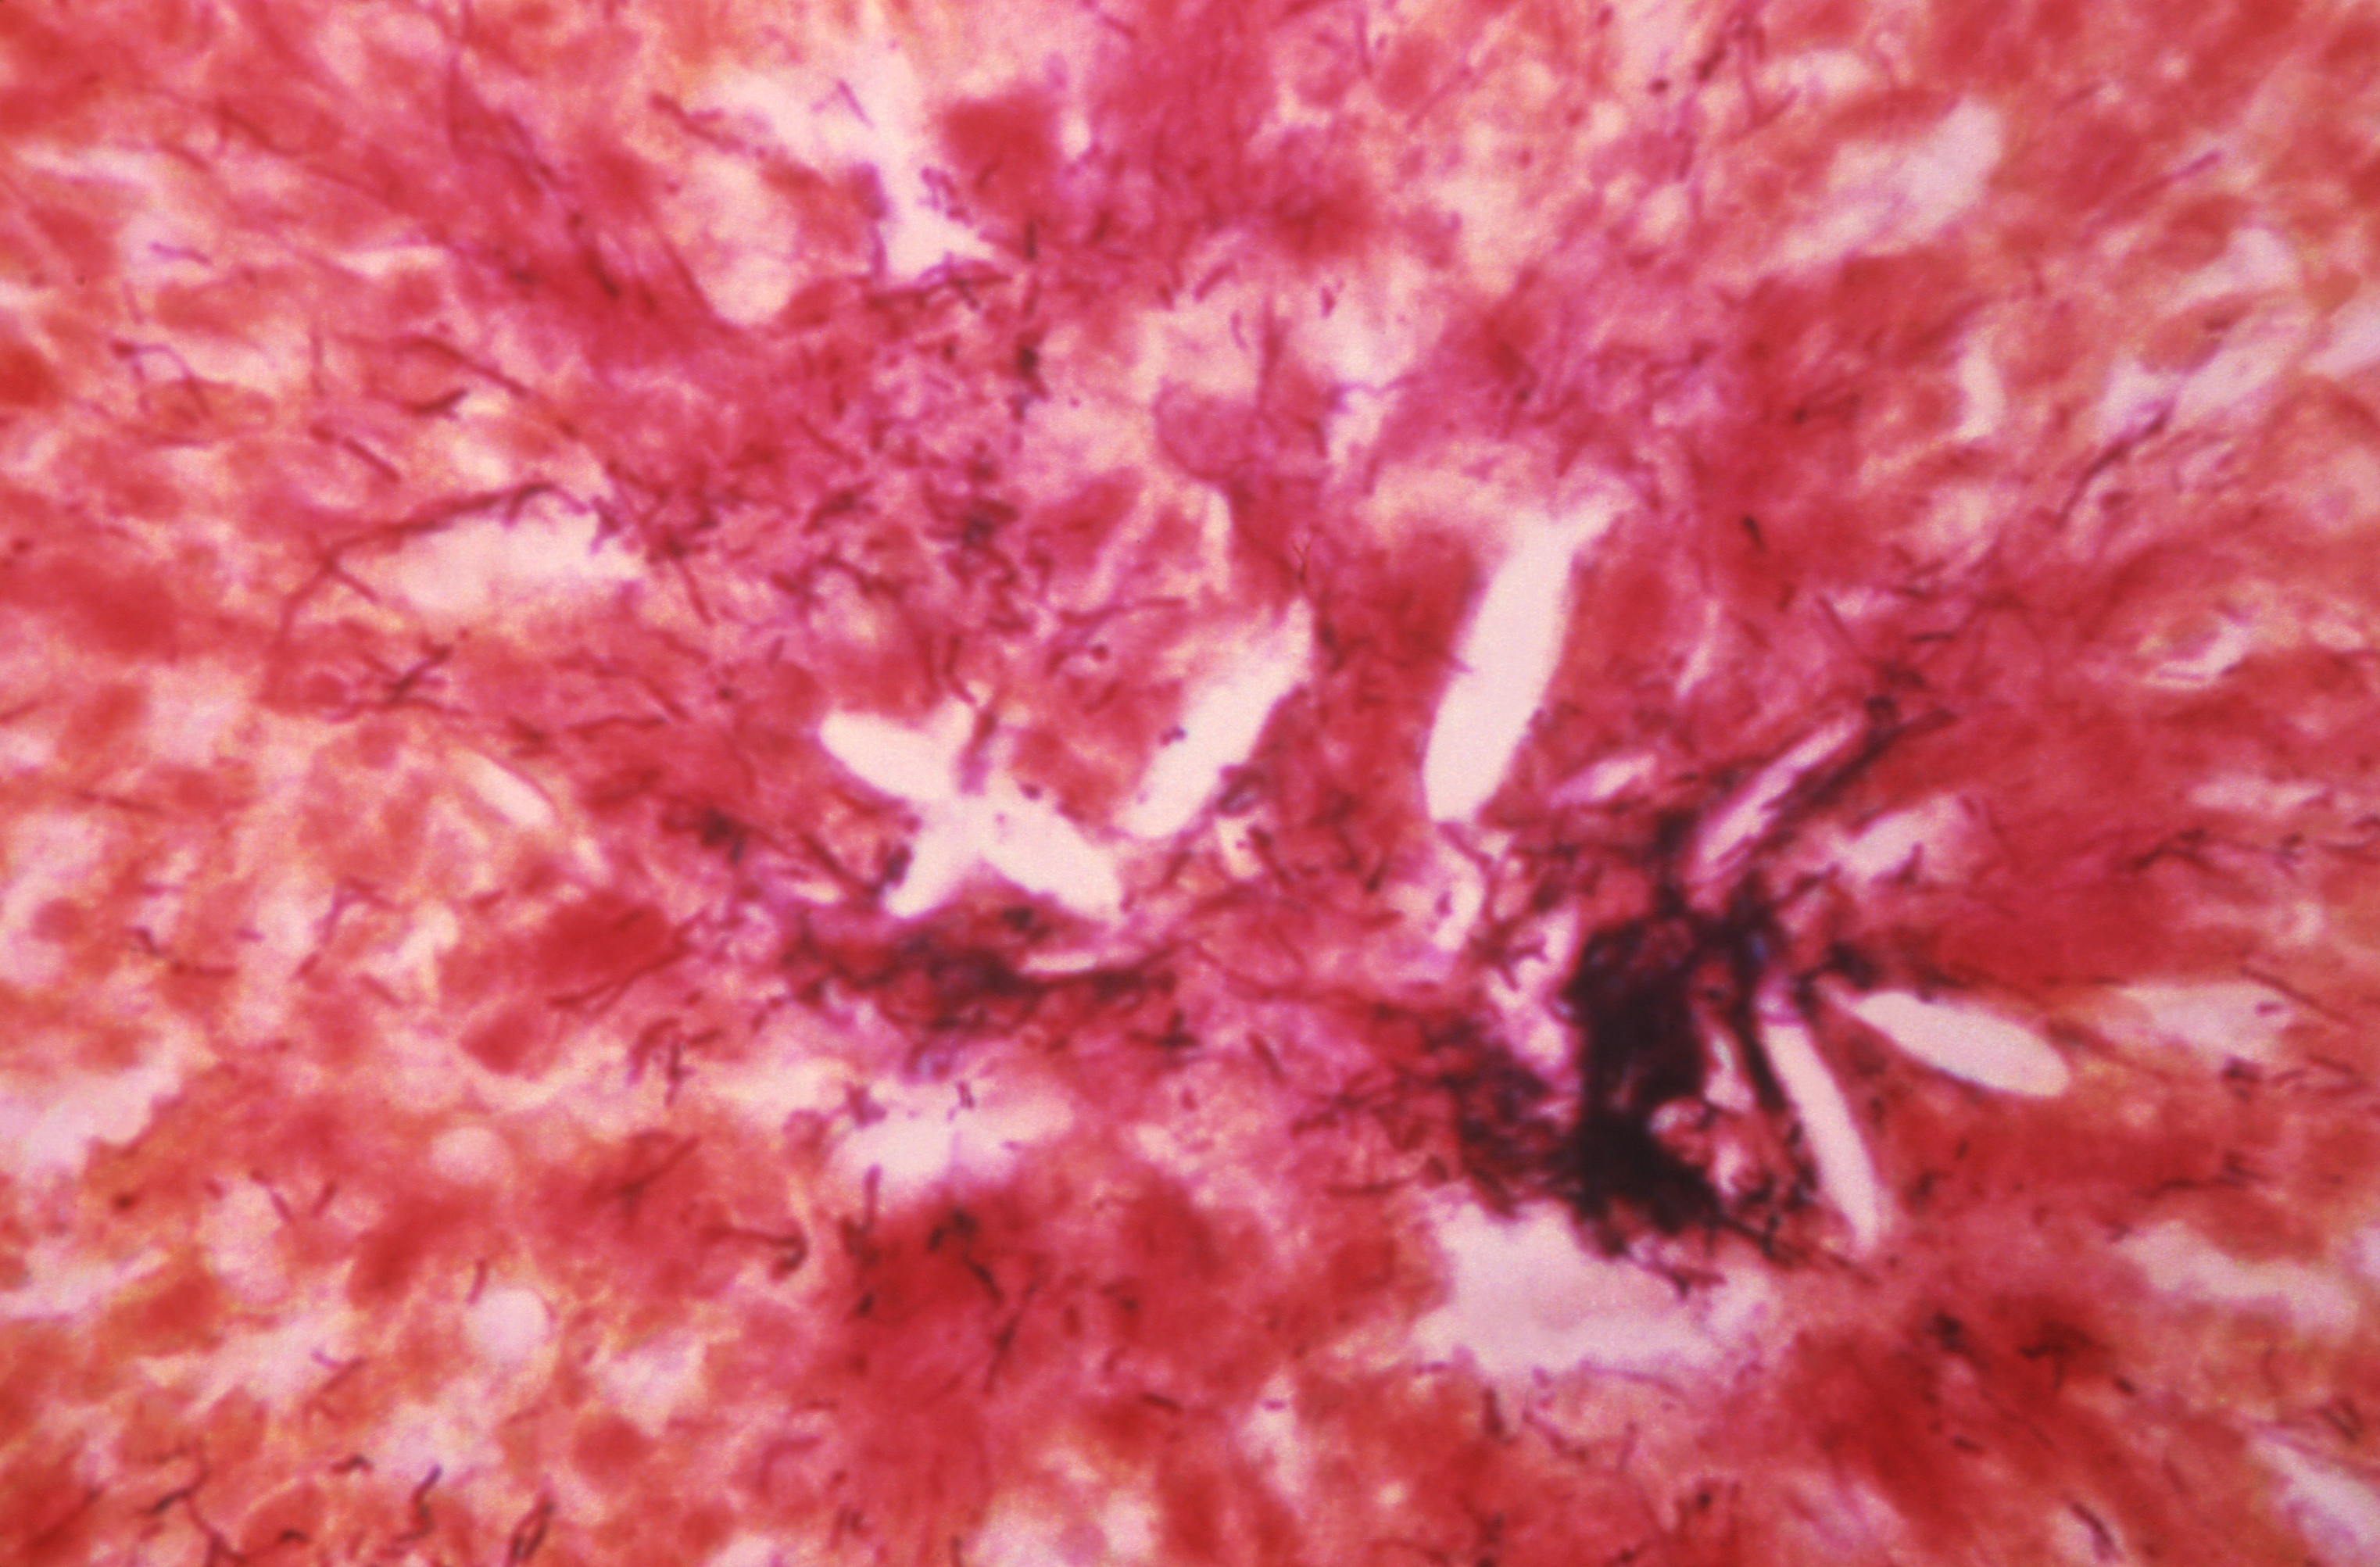 Under a magnification of 200X, this photomicrograph of a Gram-stained brain tissue specimen, revealed the presence of a chronic inflammatory sulfur granule in a case of actinomycosis, caused by a Gram-positive, fungus-like aerobic bacterium of the genus, Actinomyces